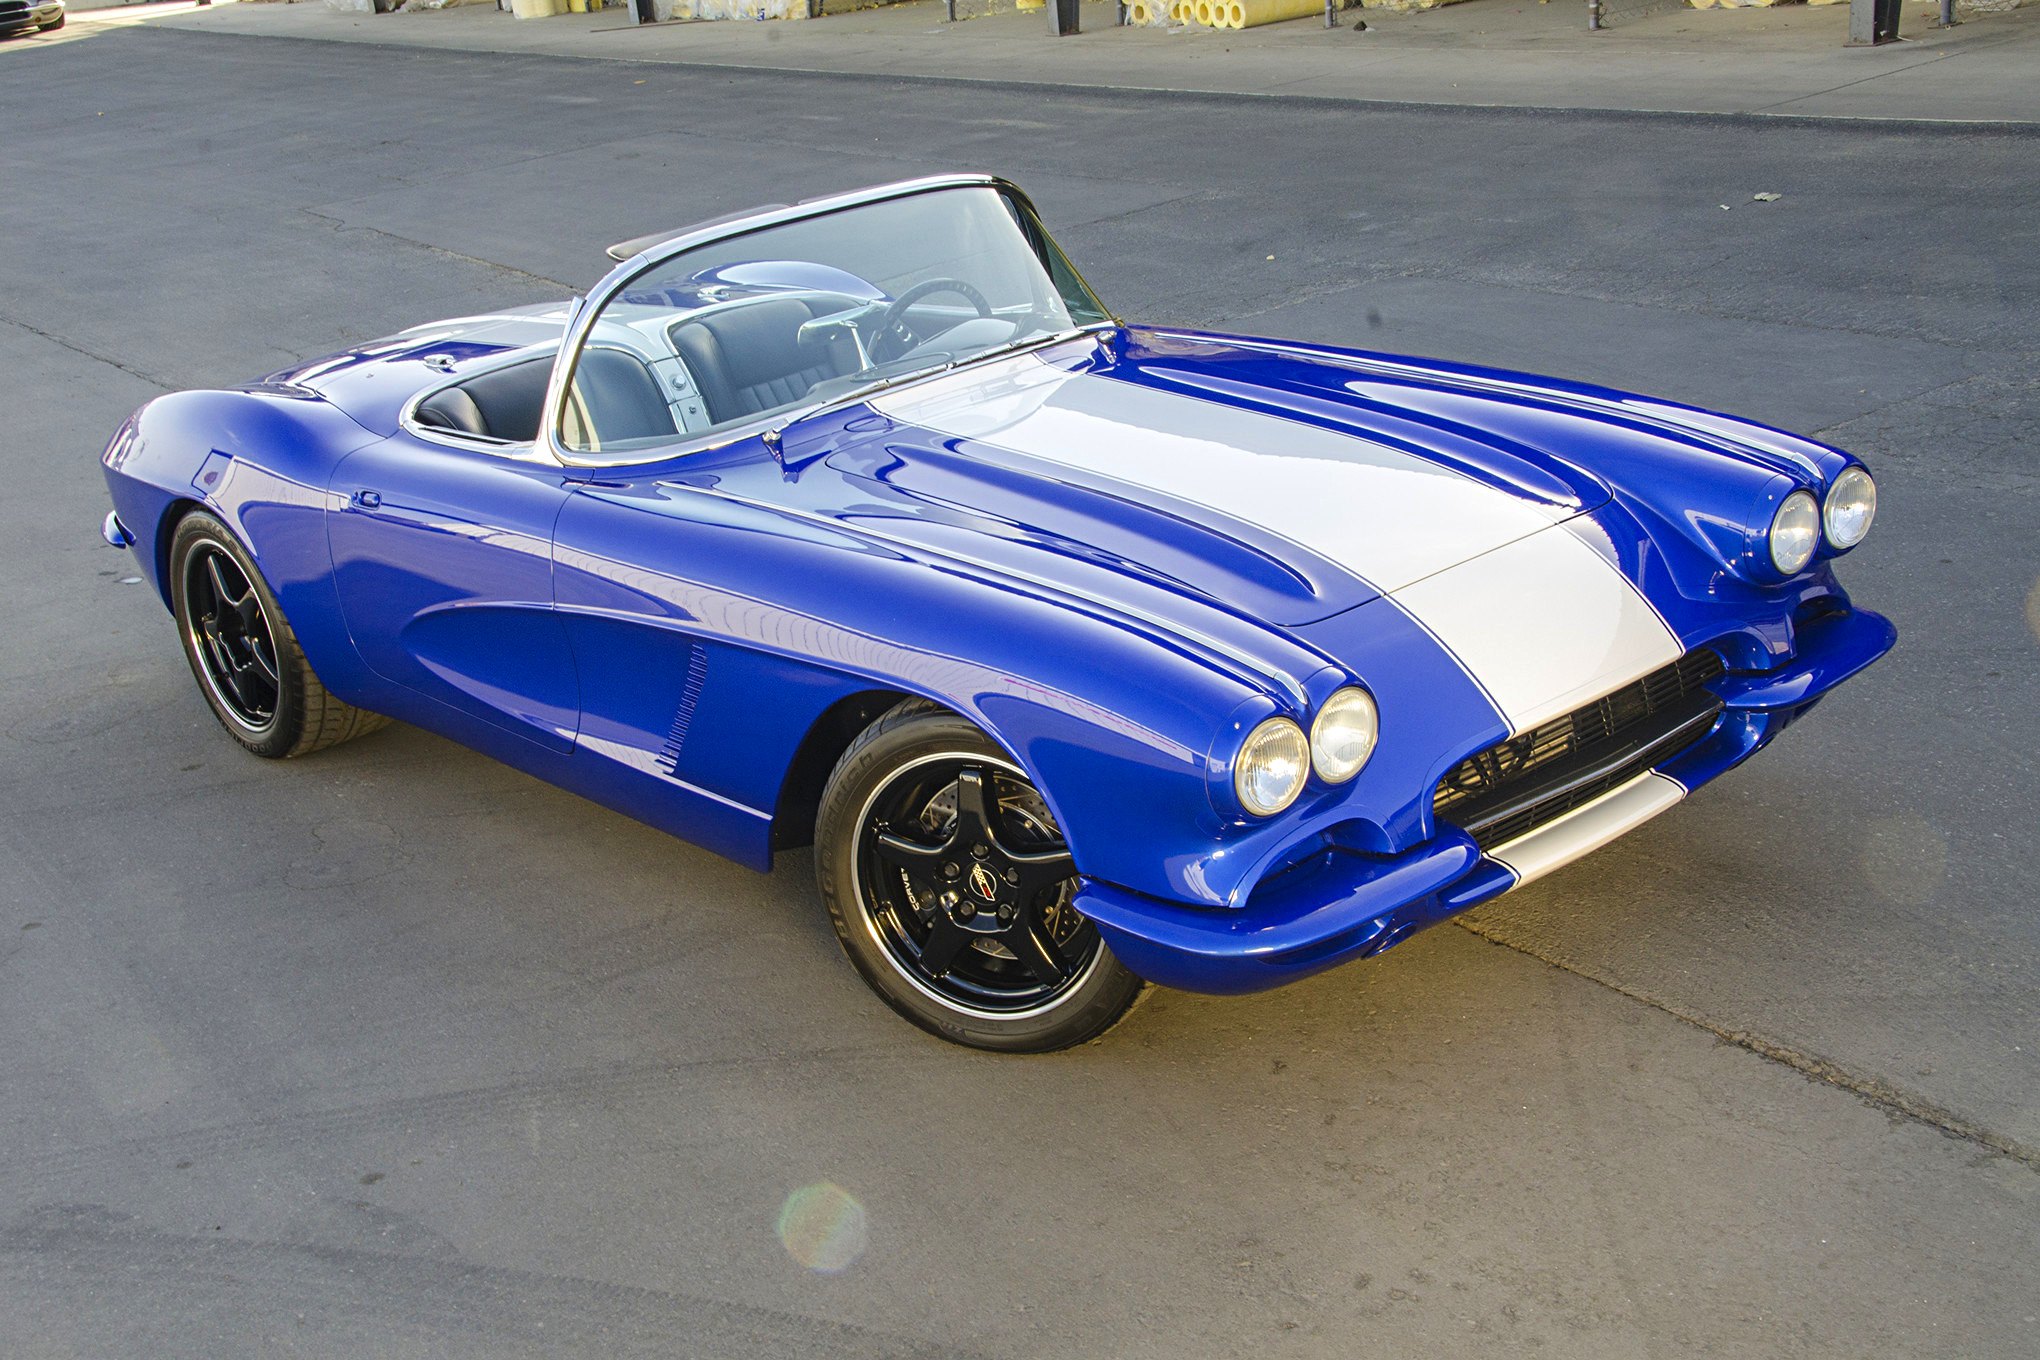 Crystal Clear Headlights on Blue Convertible Chevy Corvette - Photo by Steve Temple